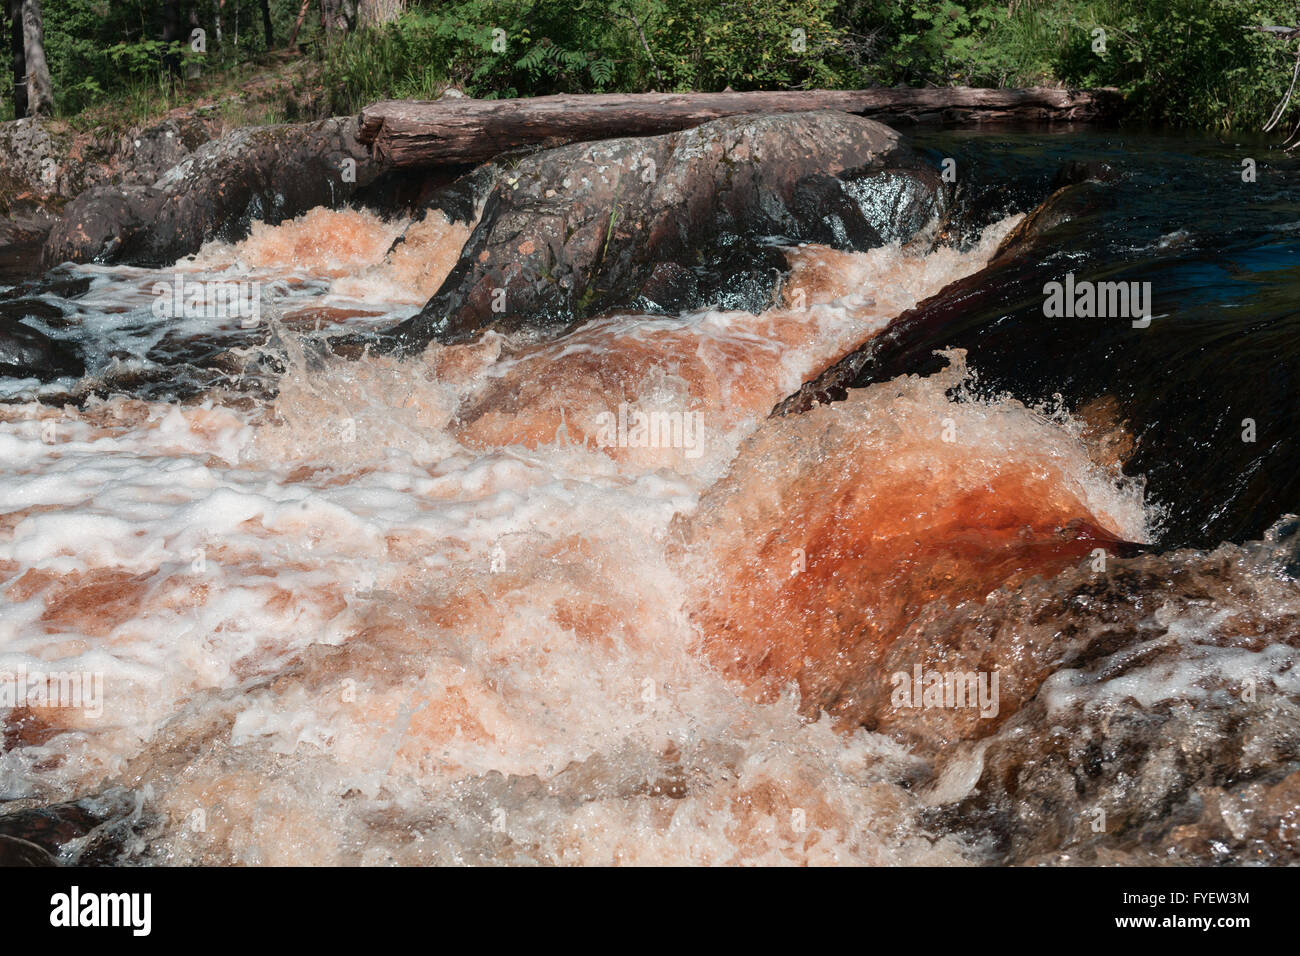 River flowing over rocks in forest. Stock Photo